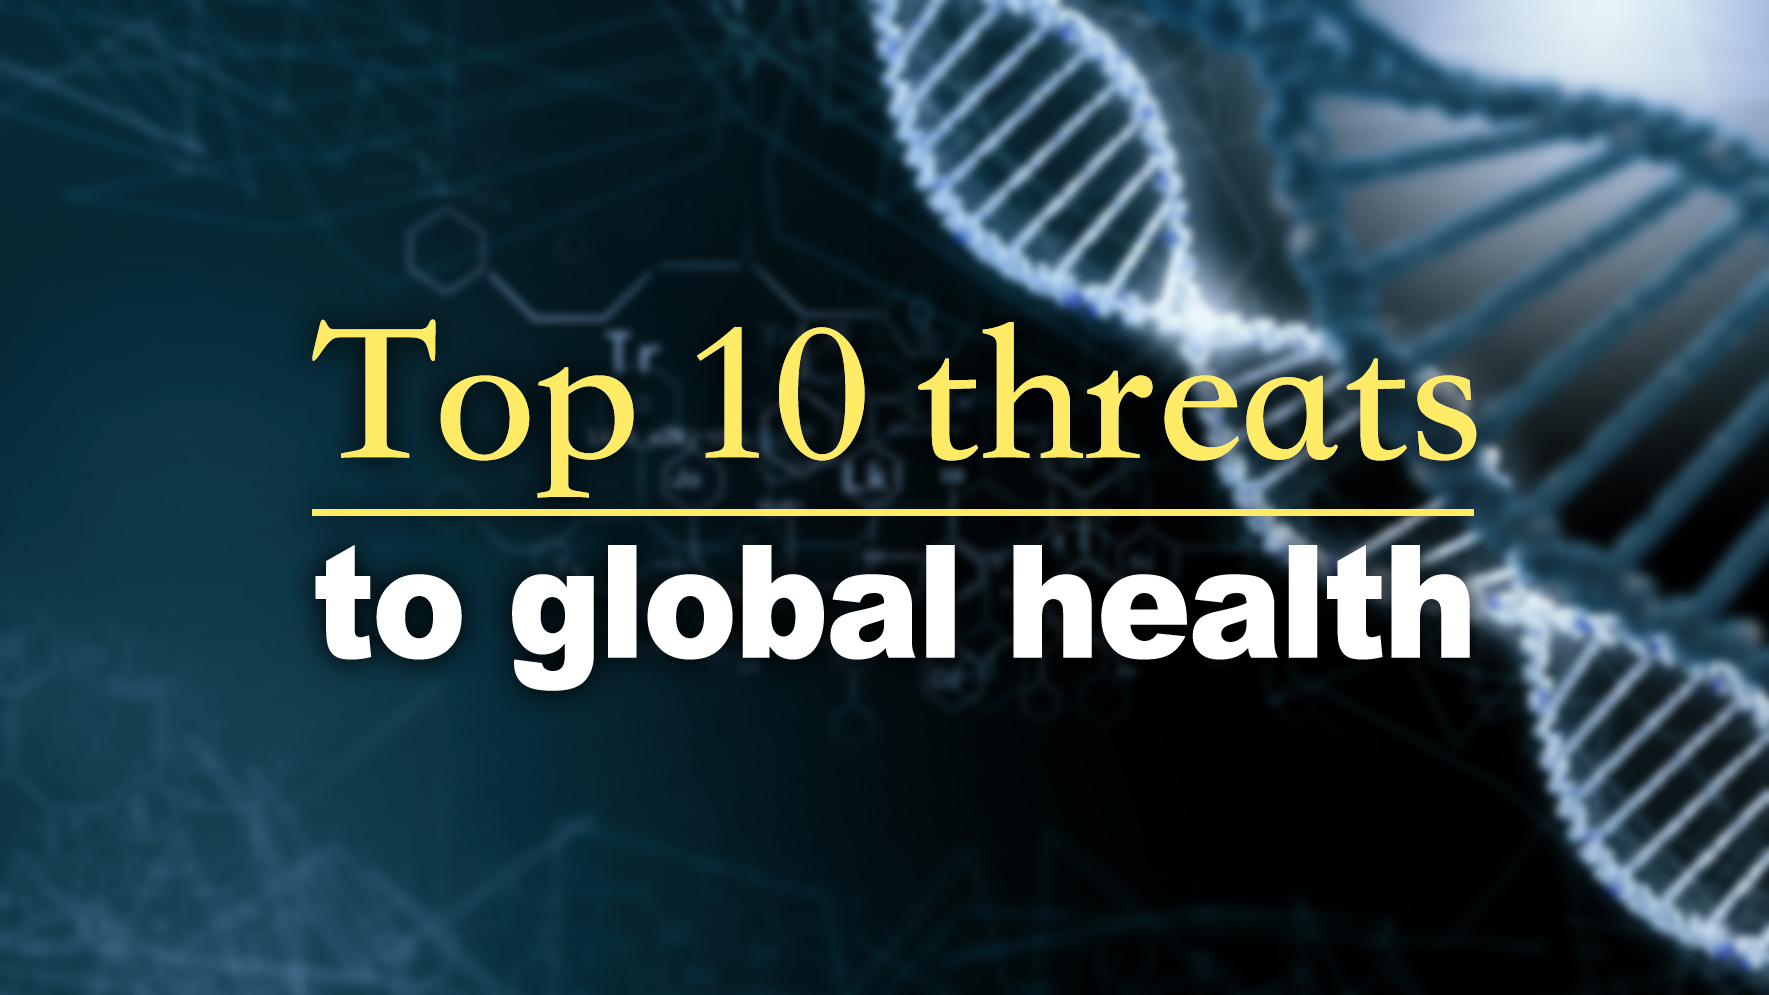 Top 10 threats to global health in 2019 at a glance CGTN